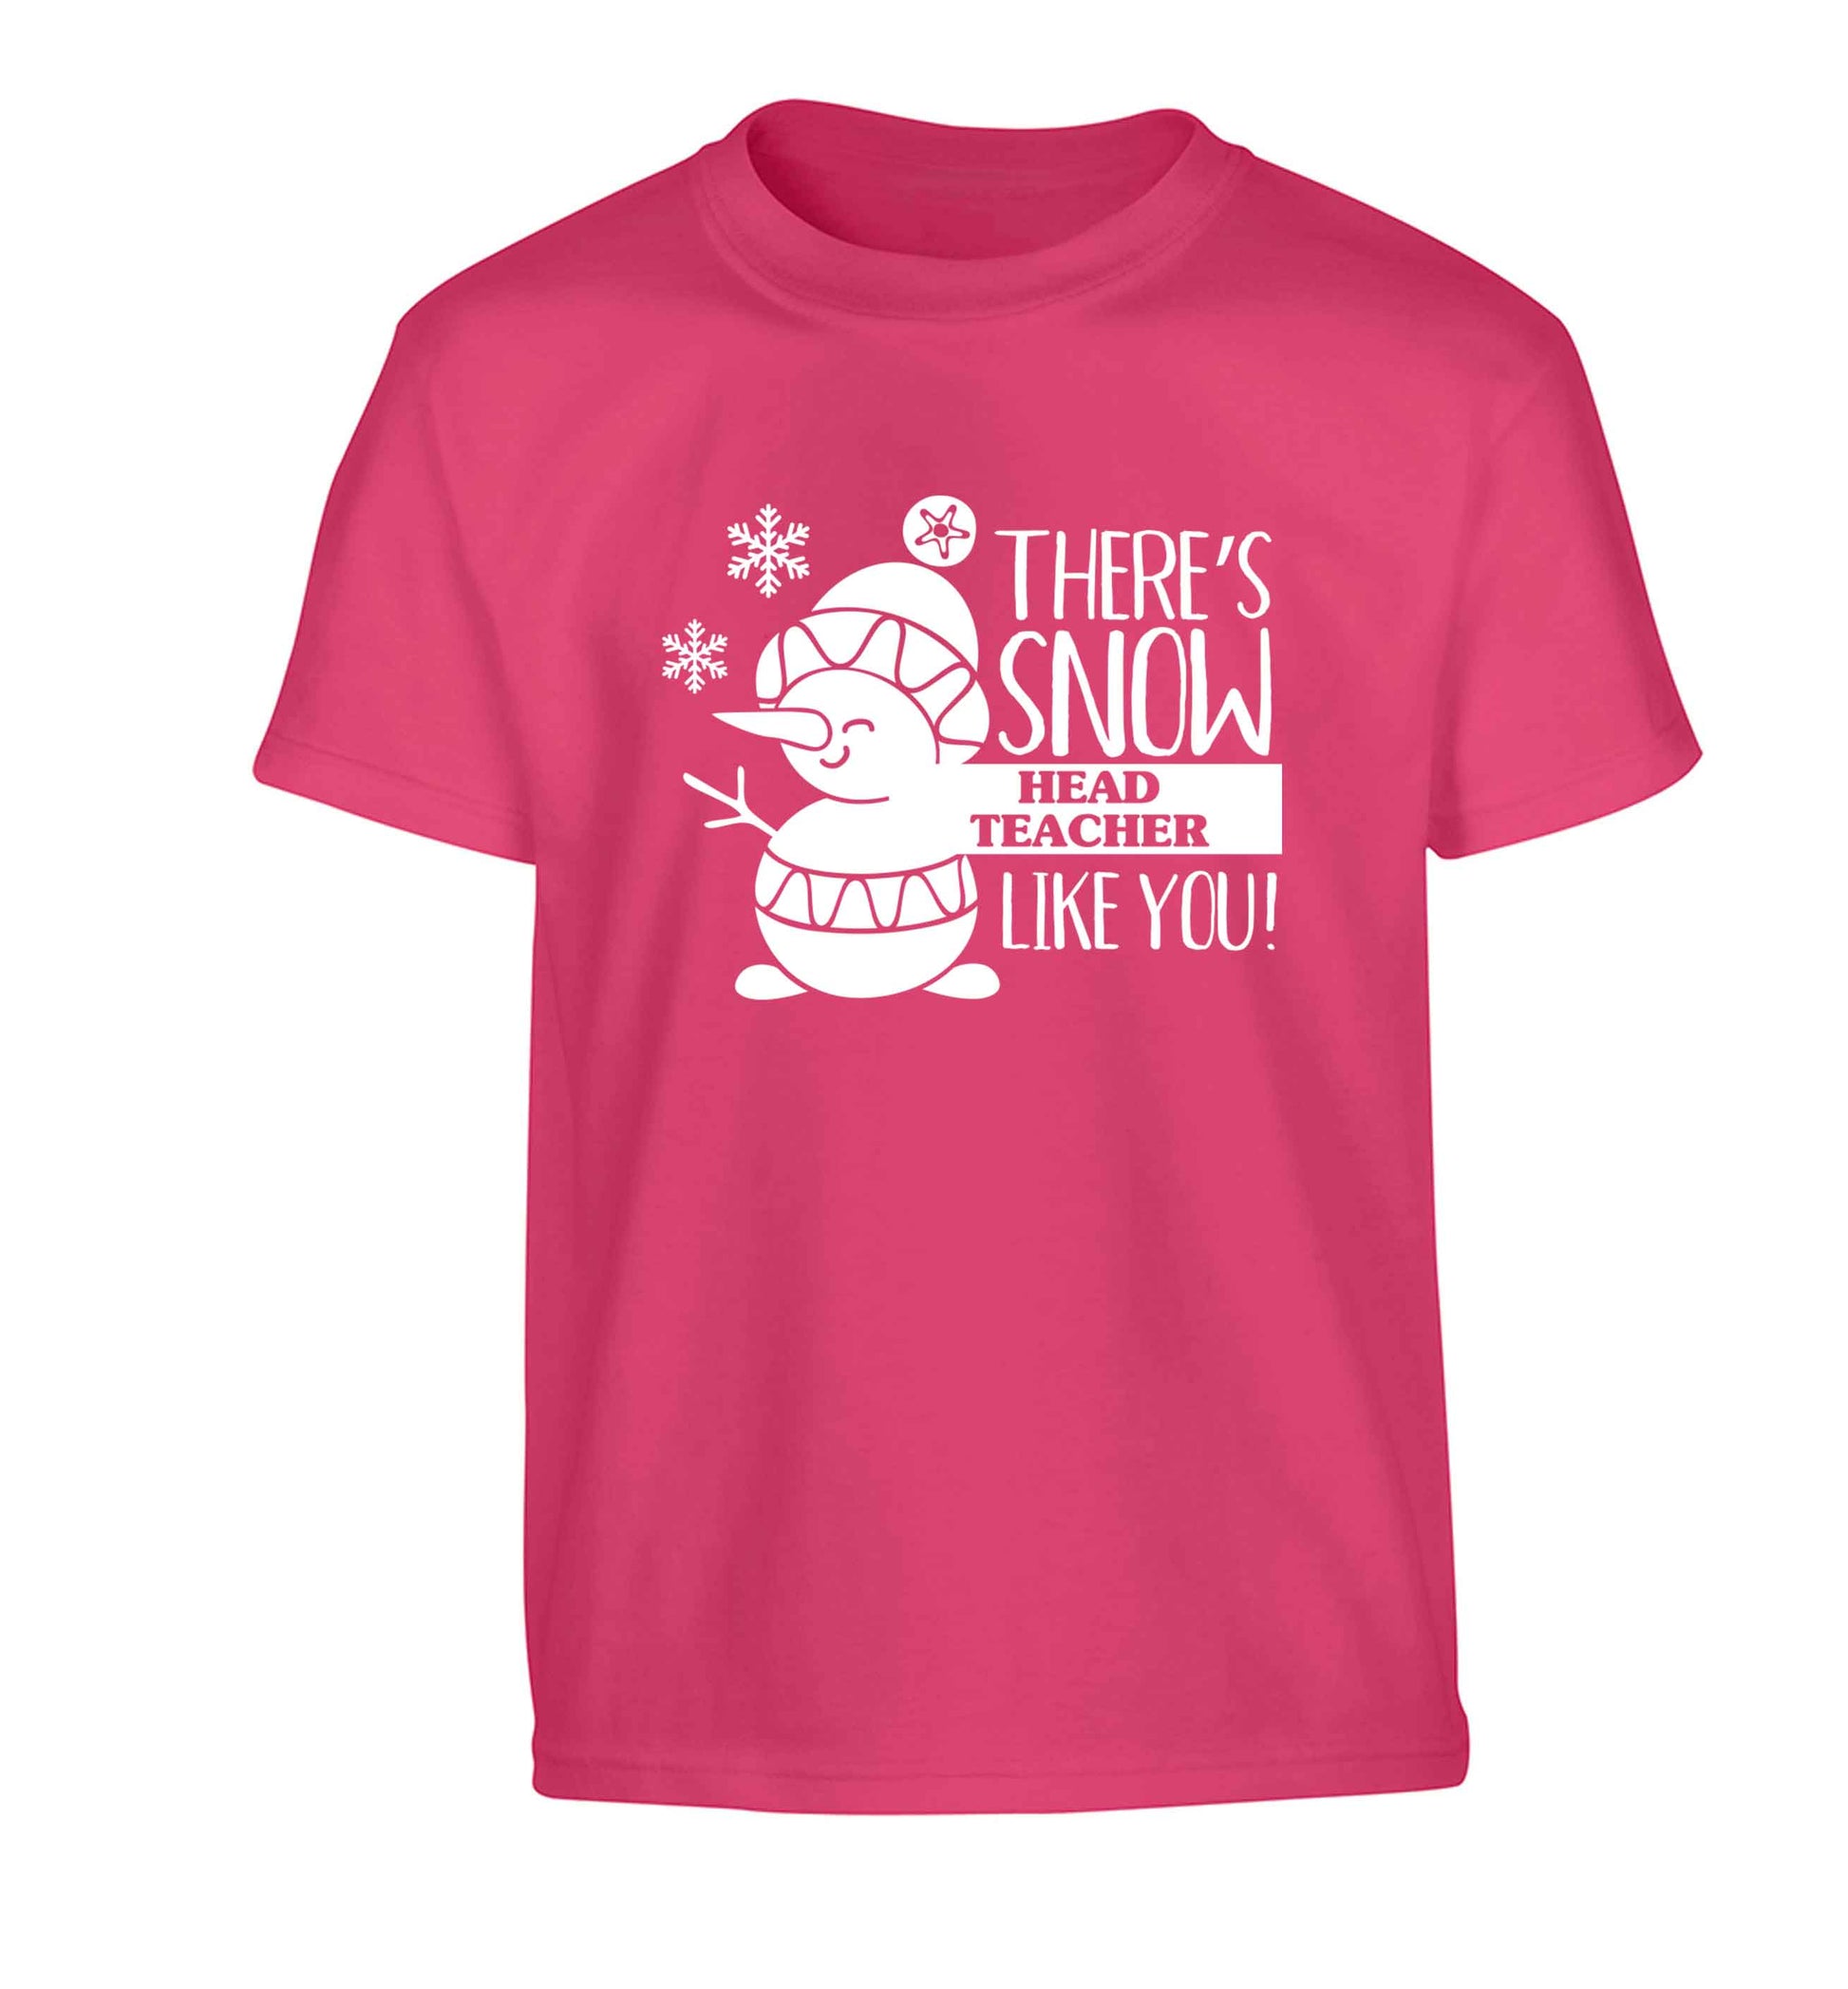 There's snow head teacher like you Children's pink Tshirt 12-13 Years